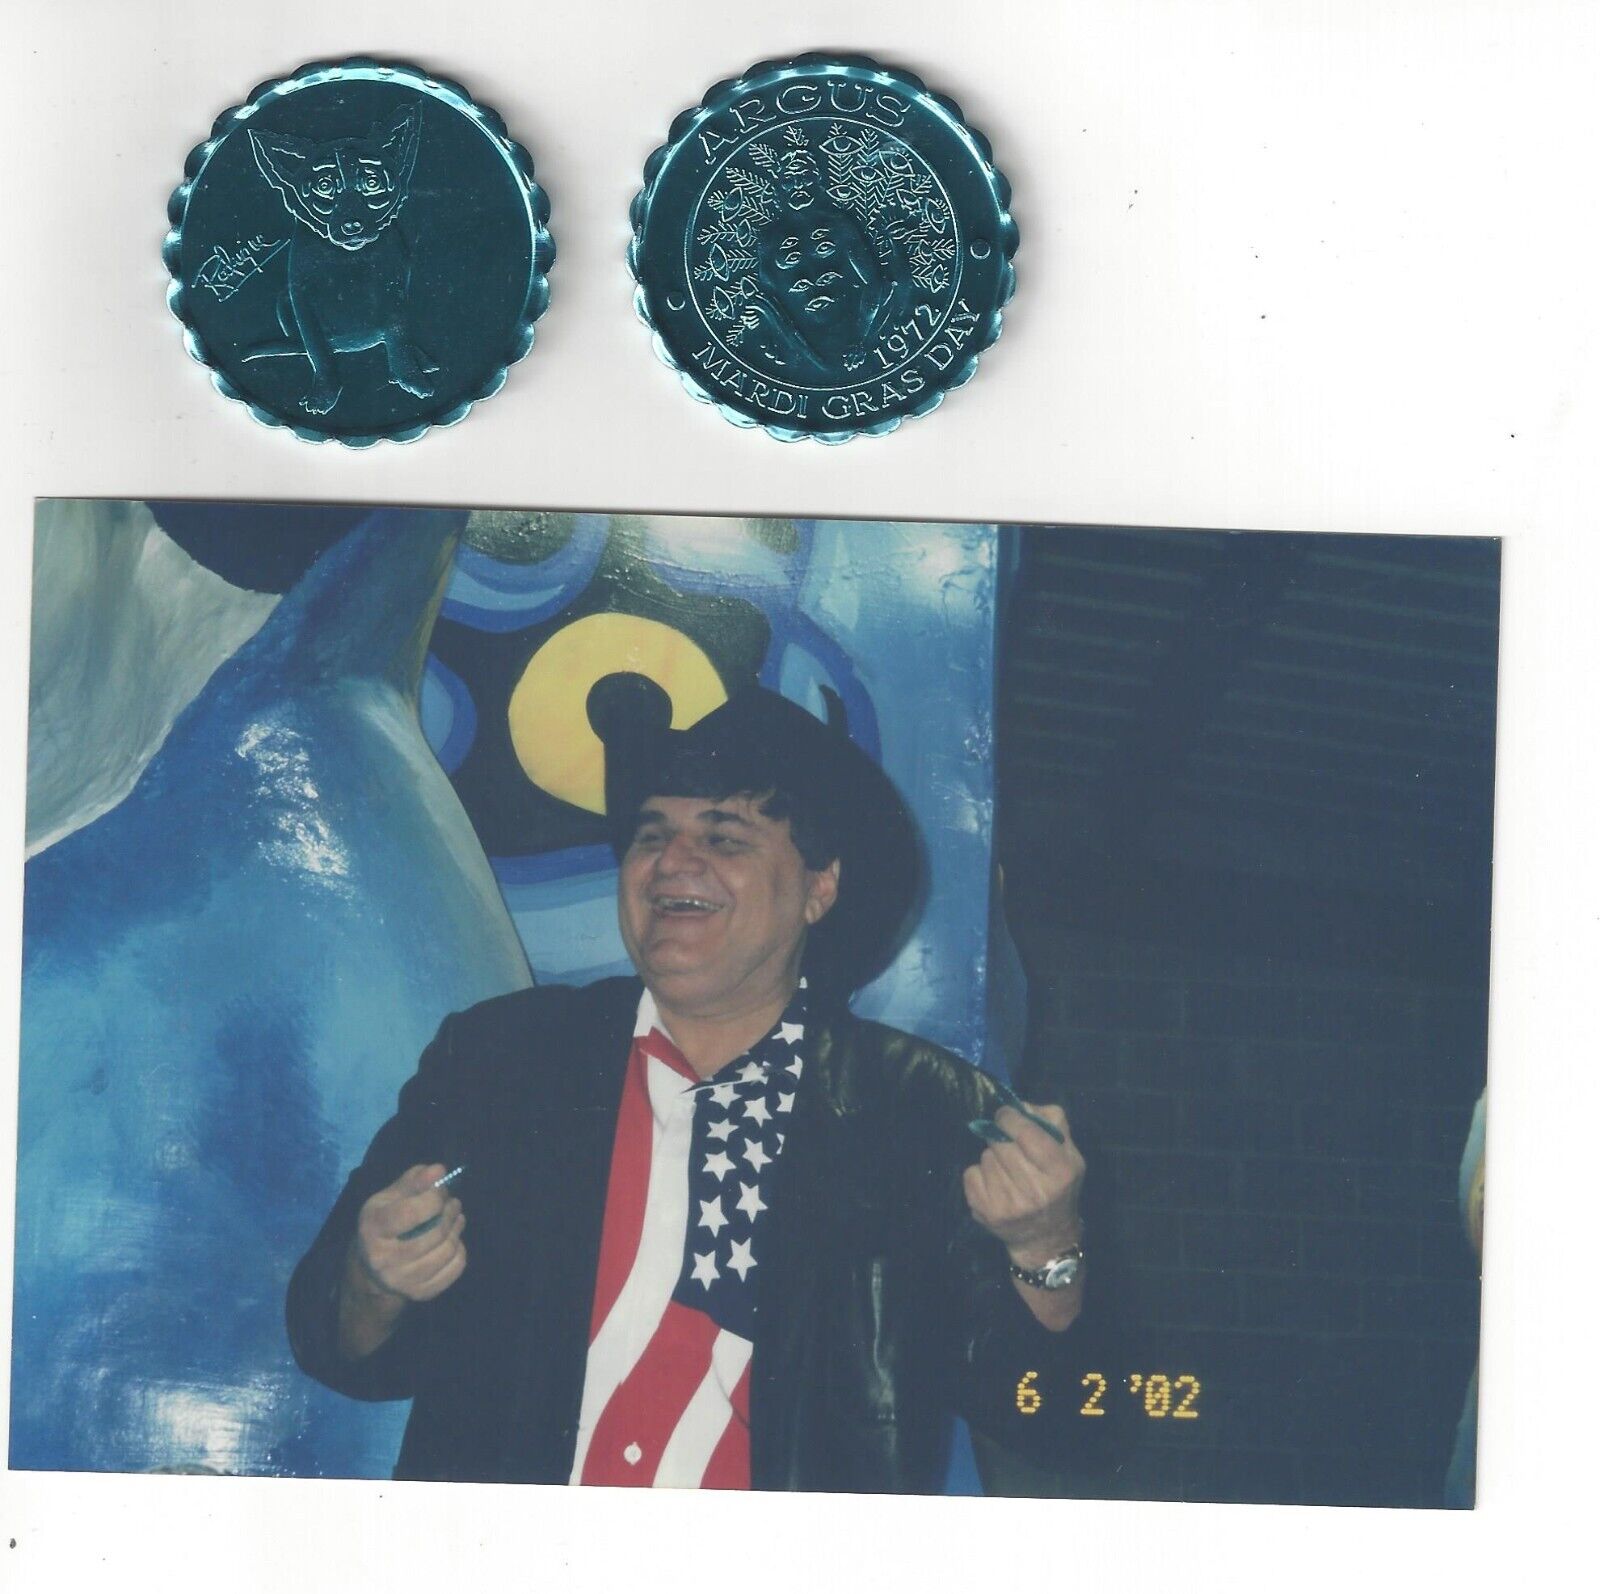 KREWE OF ARGUS RARE GEORGE RODRIQUE BLUE DOG ALUMINUM 2002 DOUBLOON FIRST YEAR